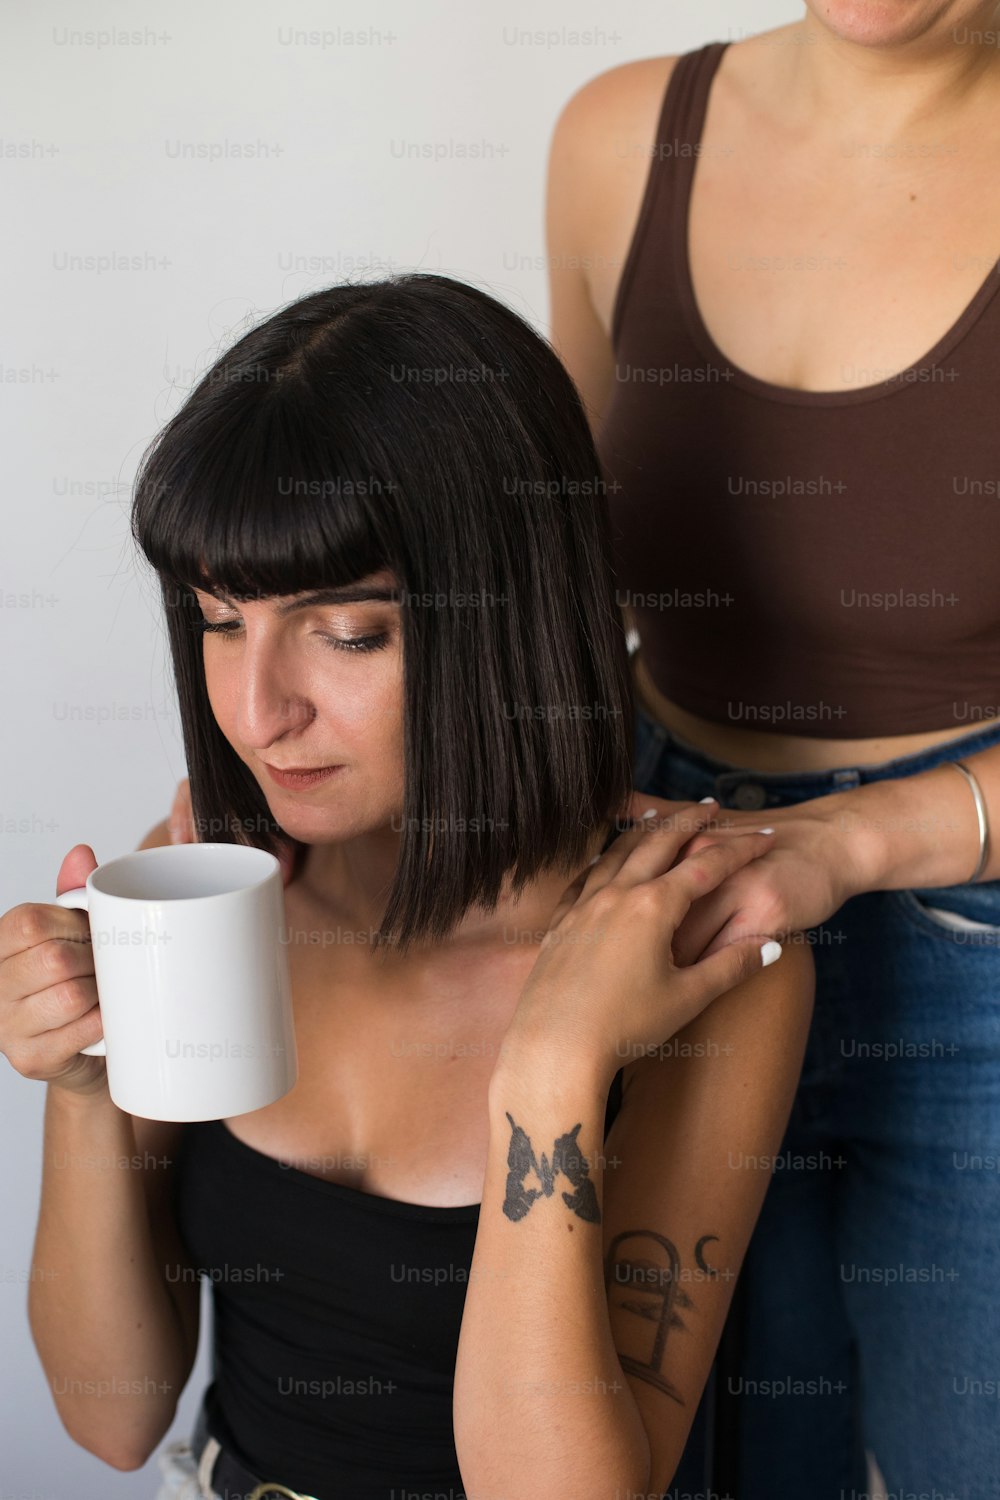 a woman holding a coffee mug while another woman looks on